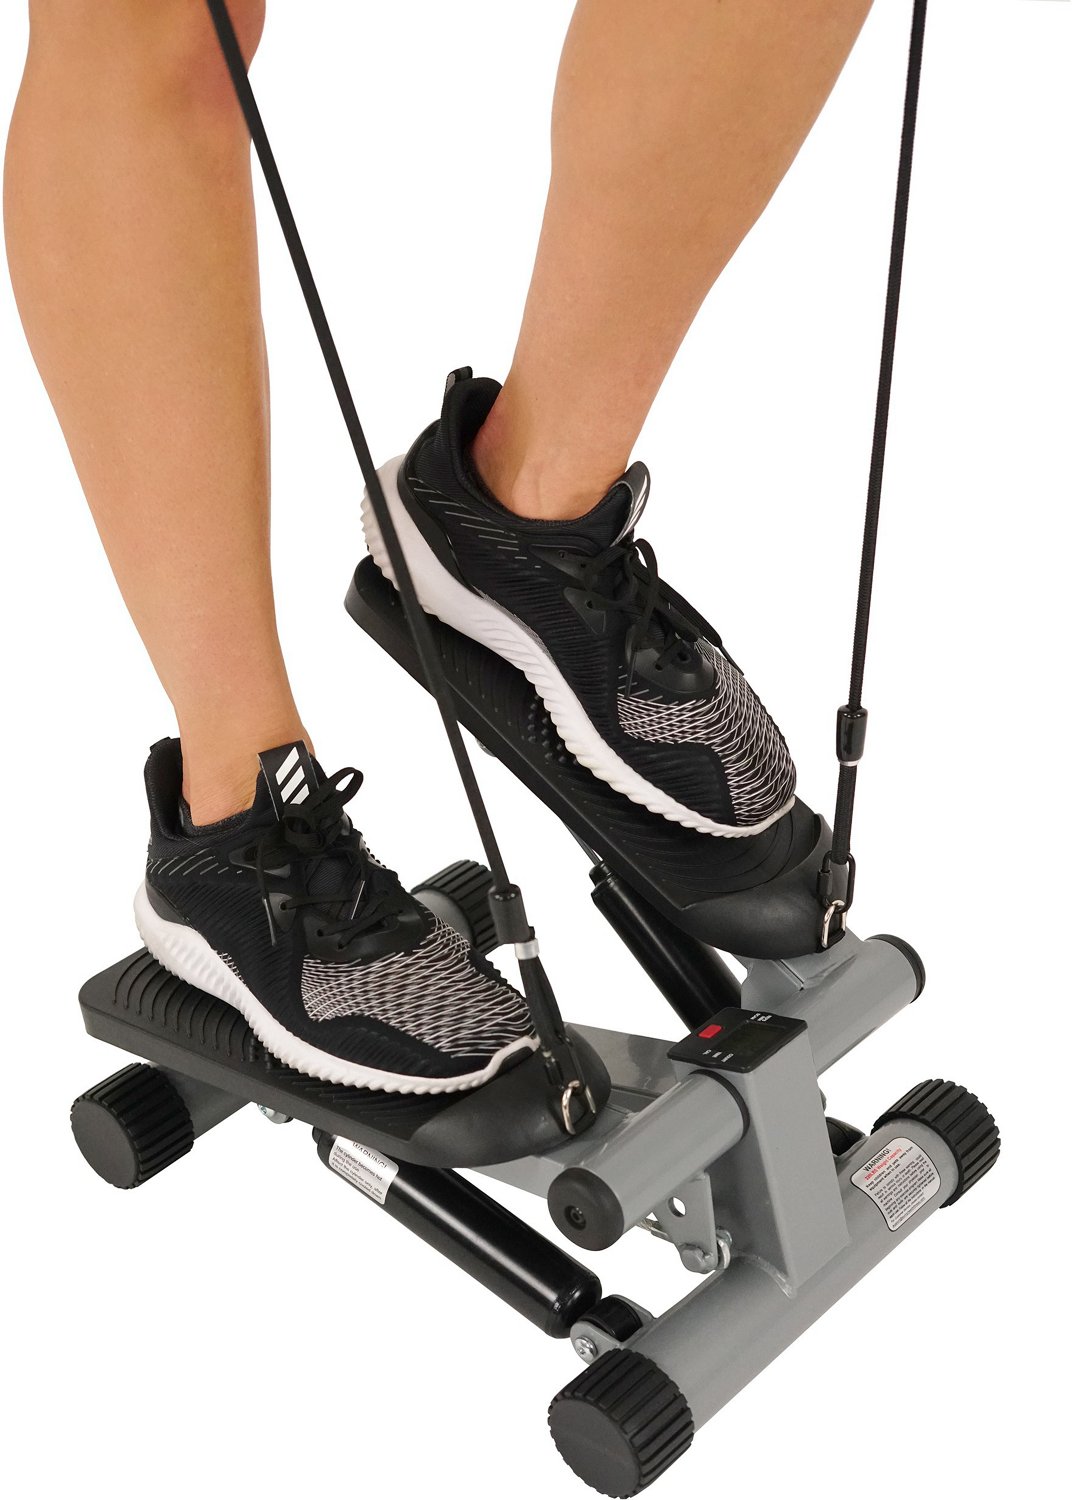 Sunny Health & Fitness Power Stepper with Bands